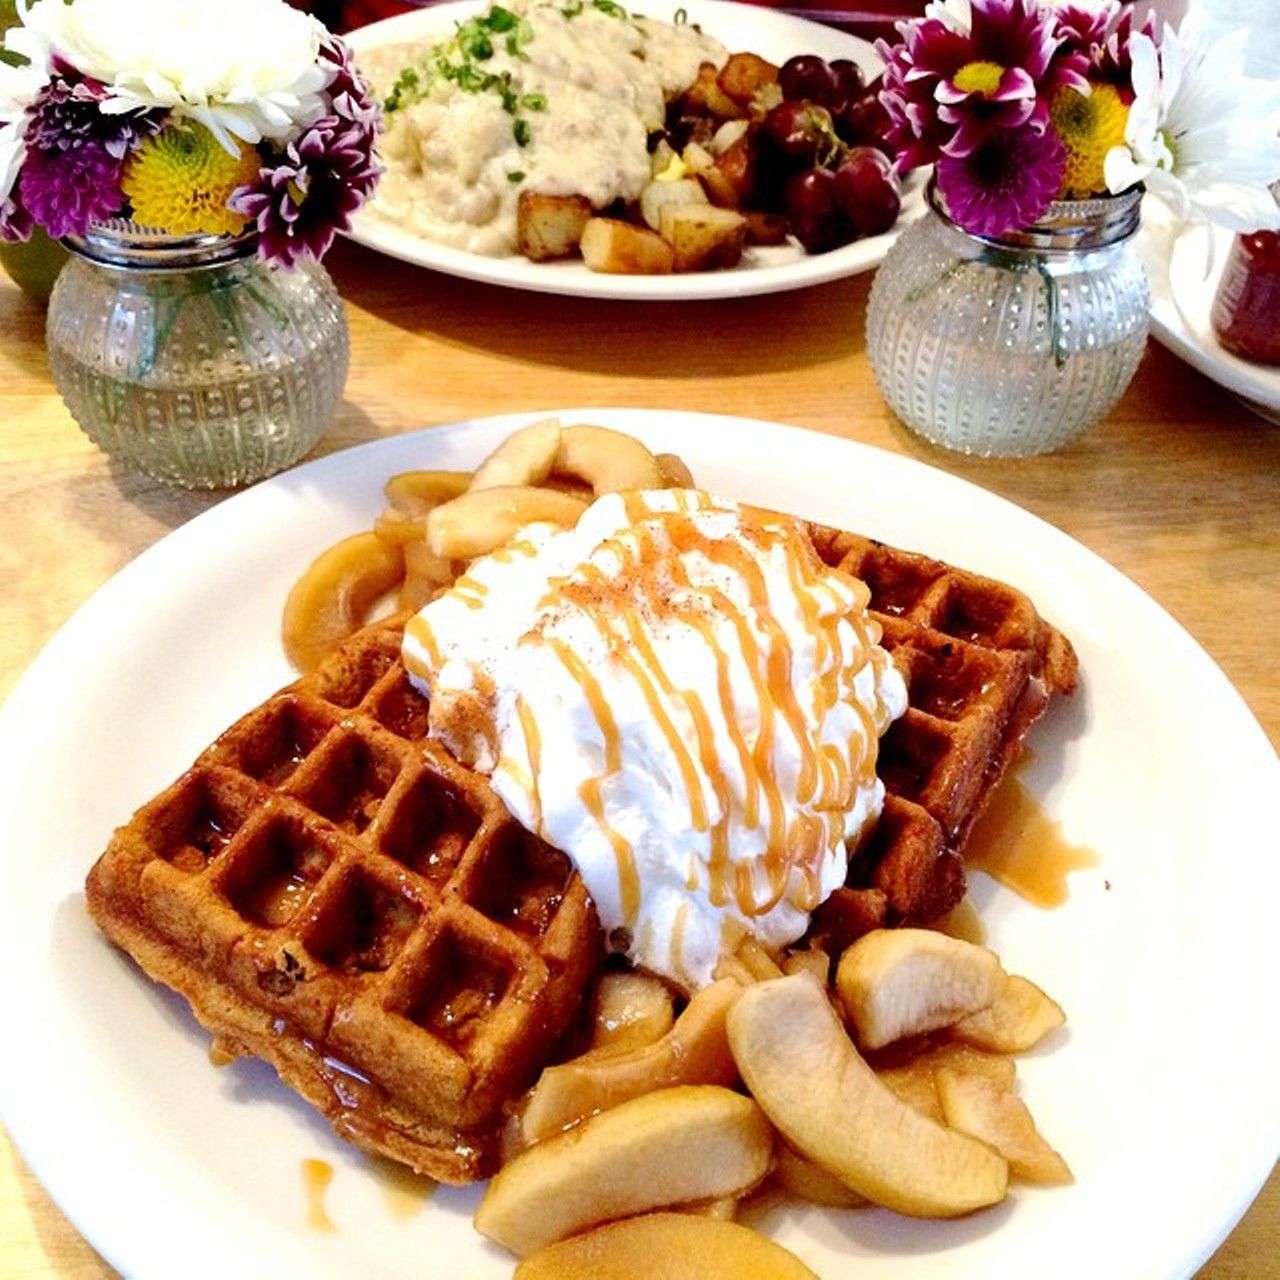 Gingerbread waffles. Photo by clefoodies.